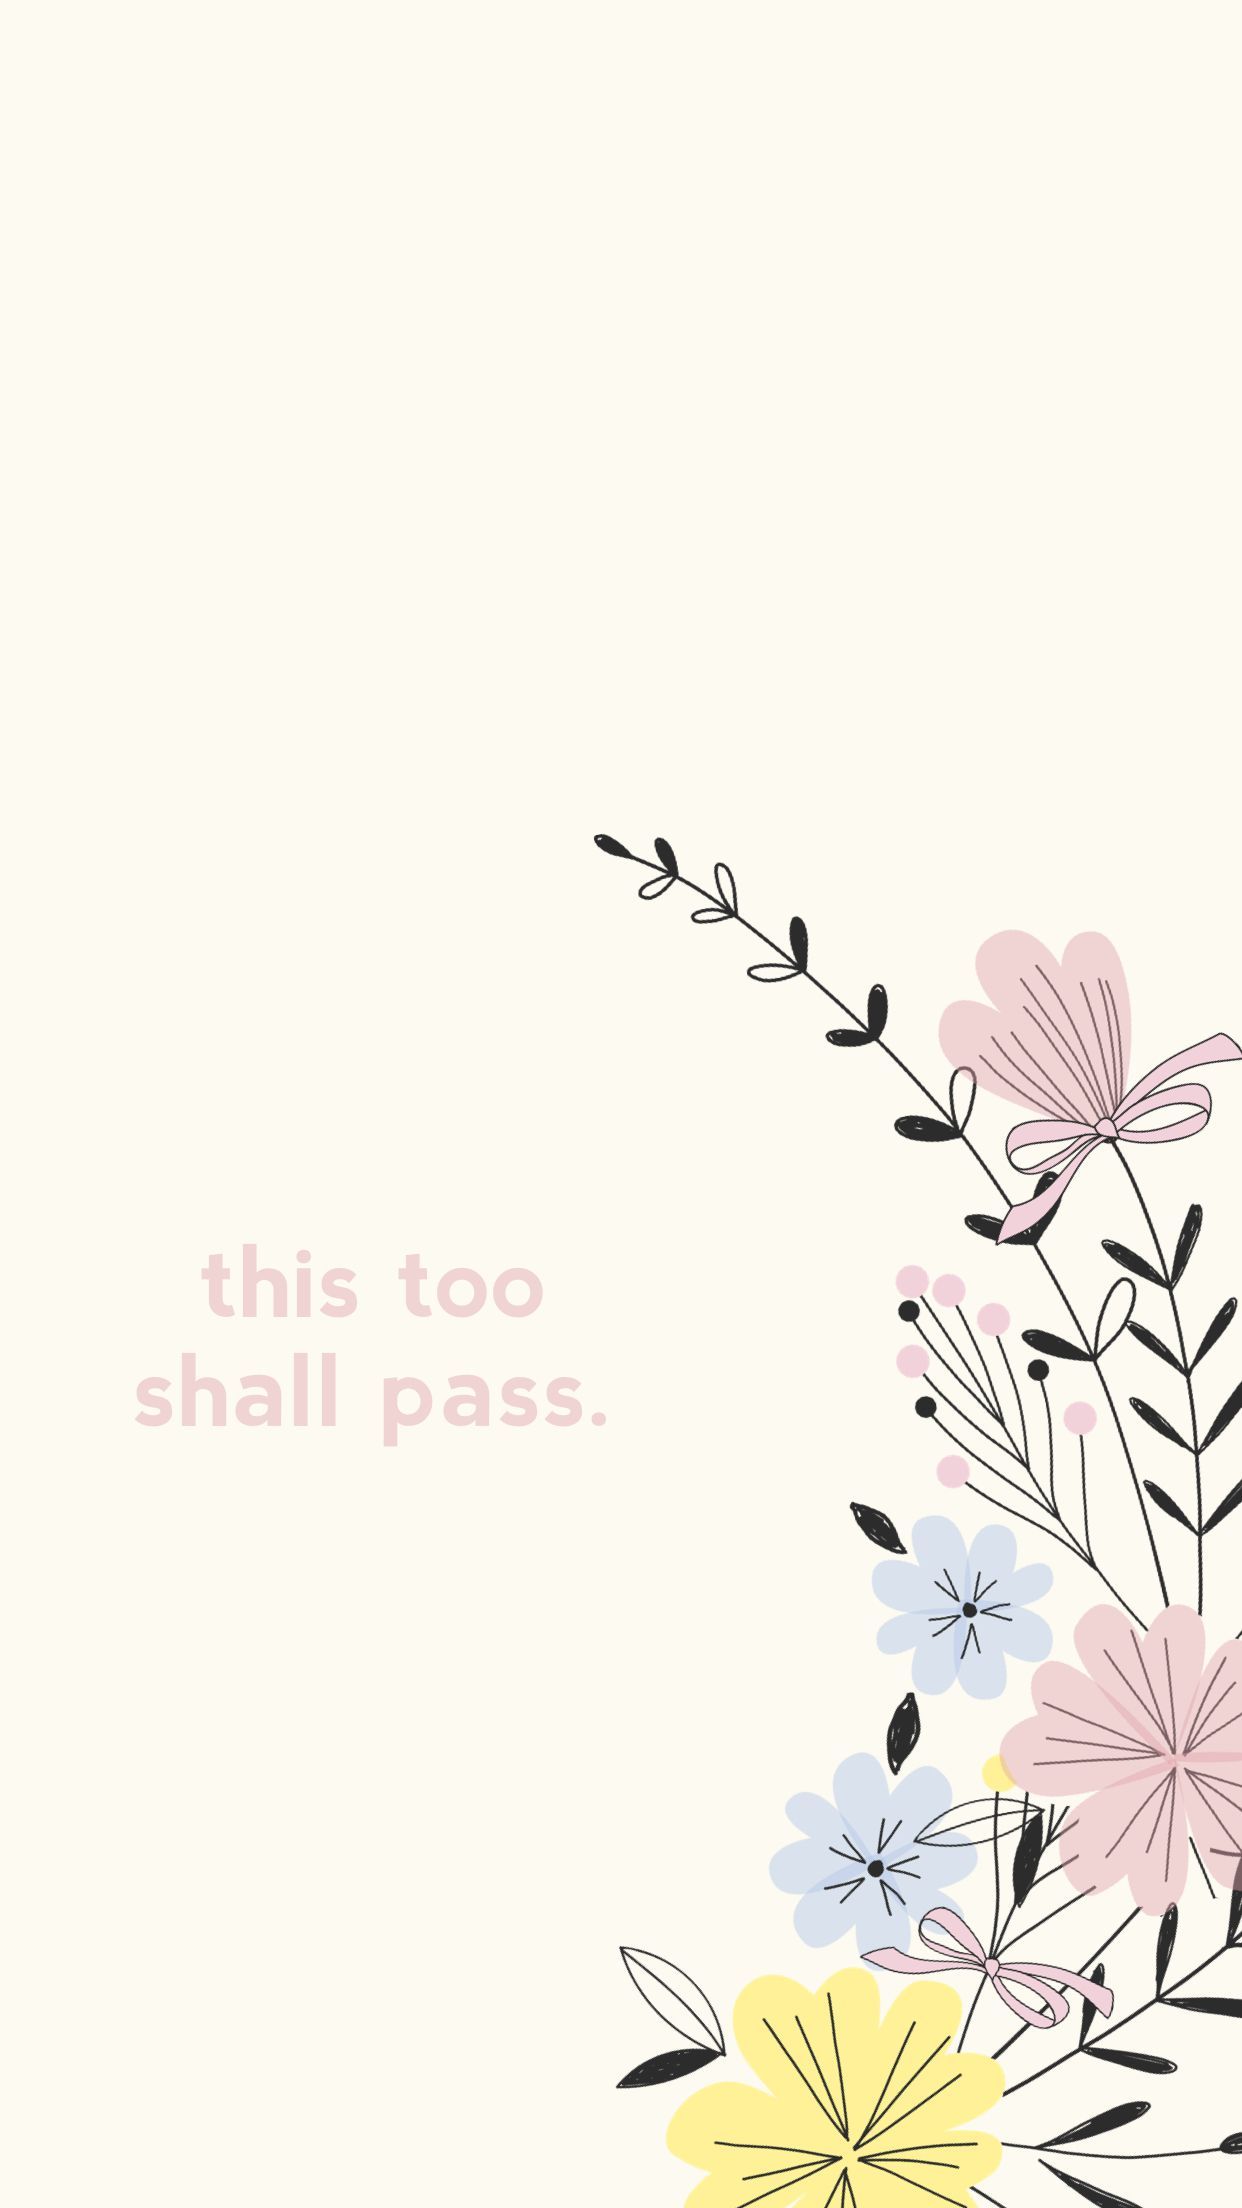 This too shall pass quote painting watercolor flowers background